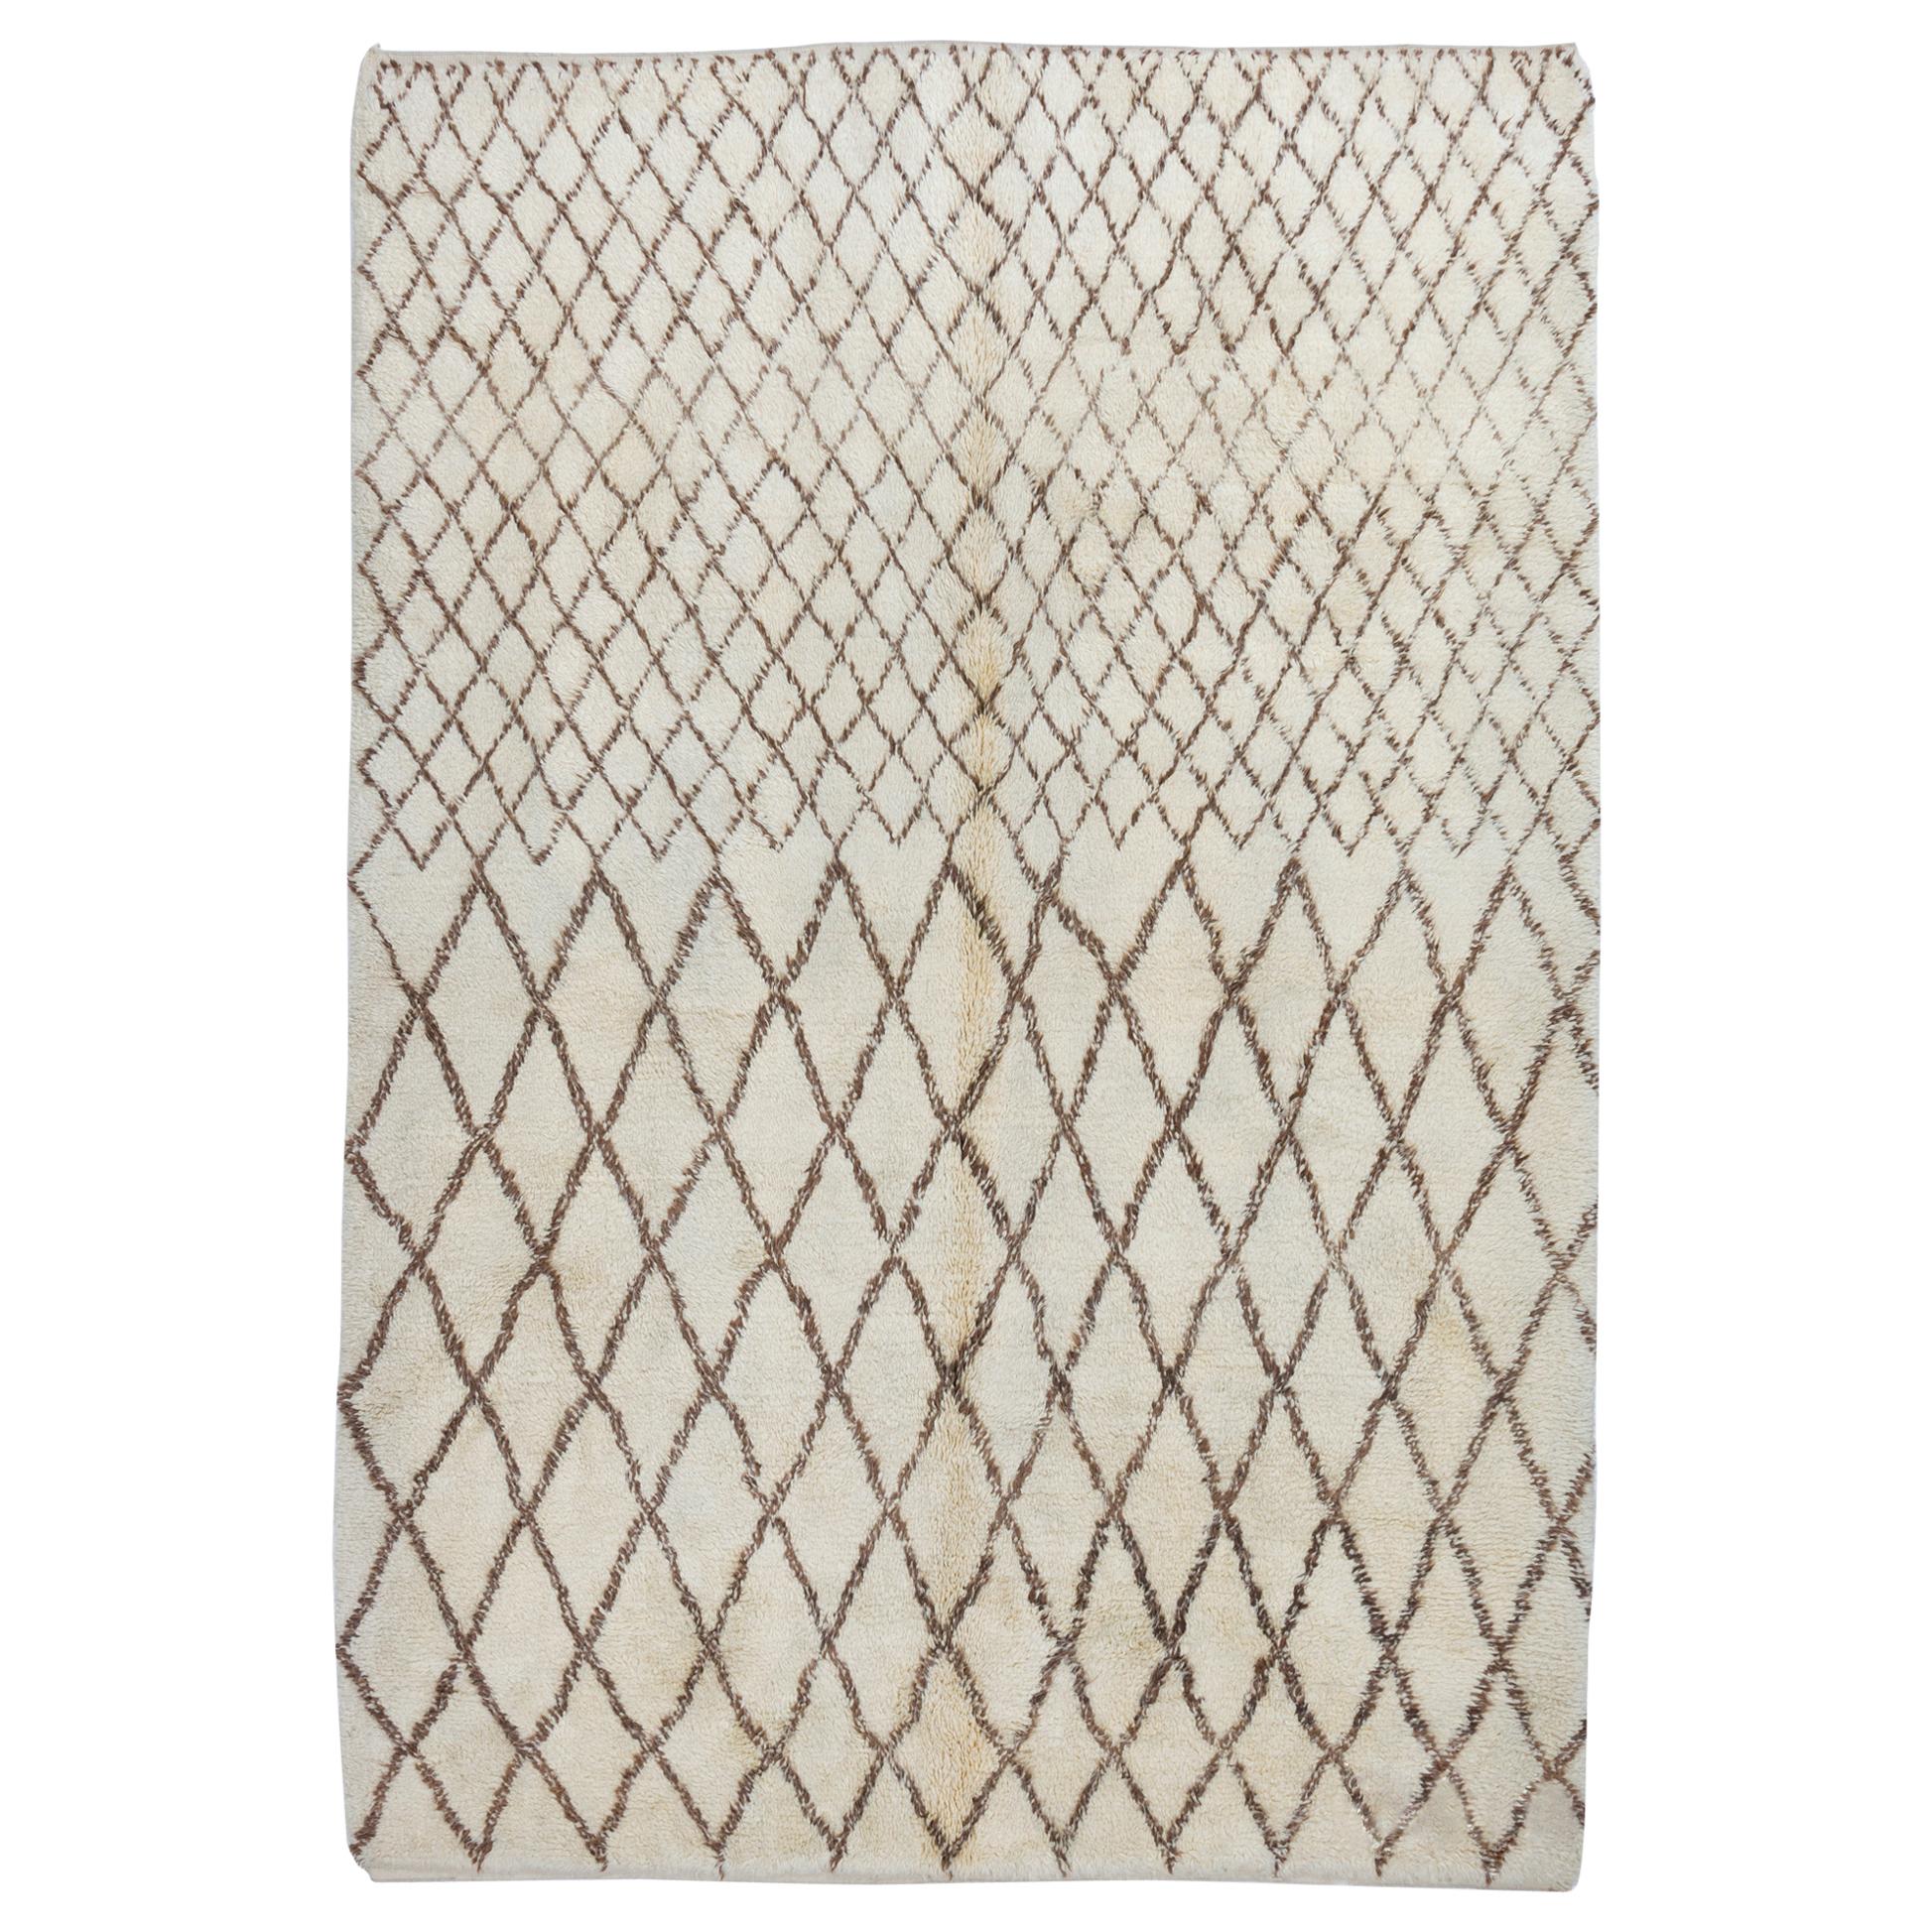 Contemporary Berber Moroccan Rug Made of Natural Wool, Custom Options Available